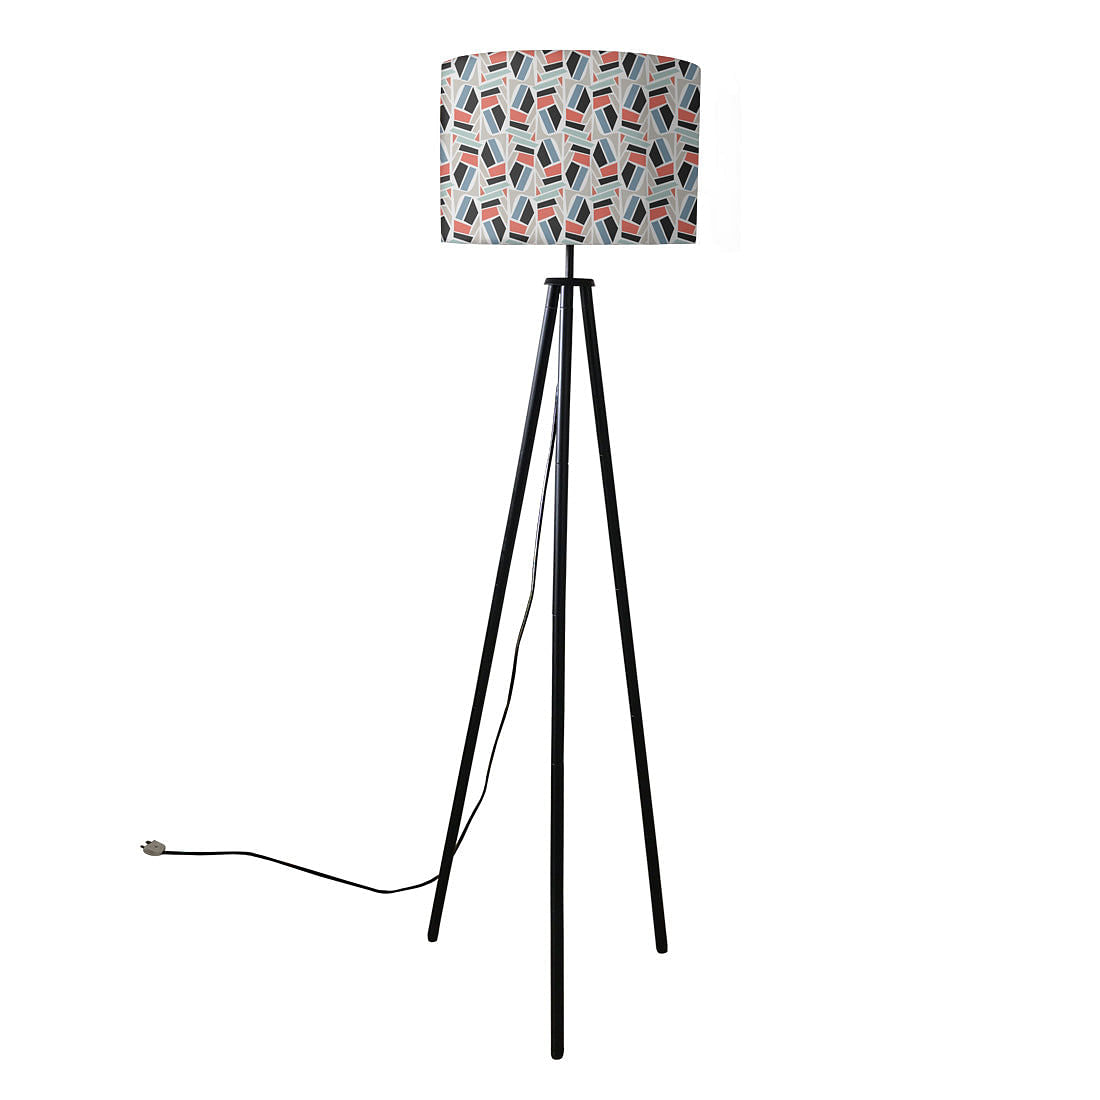 Tripod Floor Lamp Standing Light for Living Rooms -Abstract Design Effect Nutcase